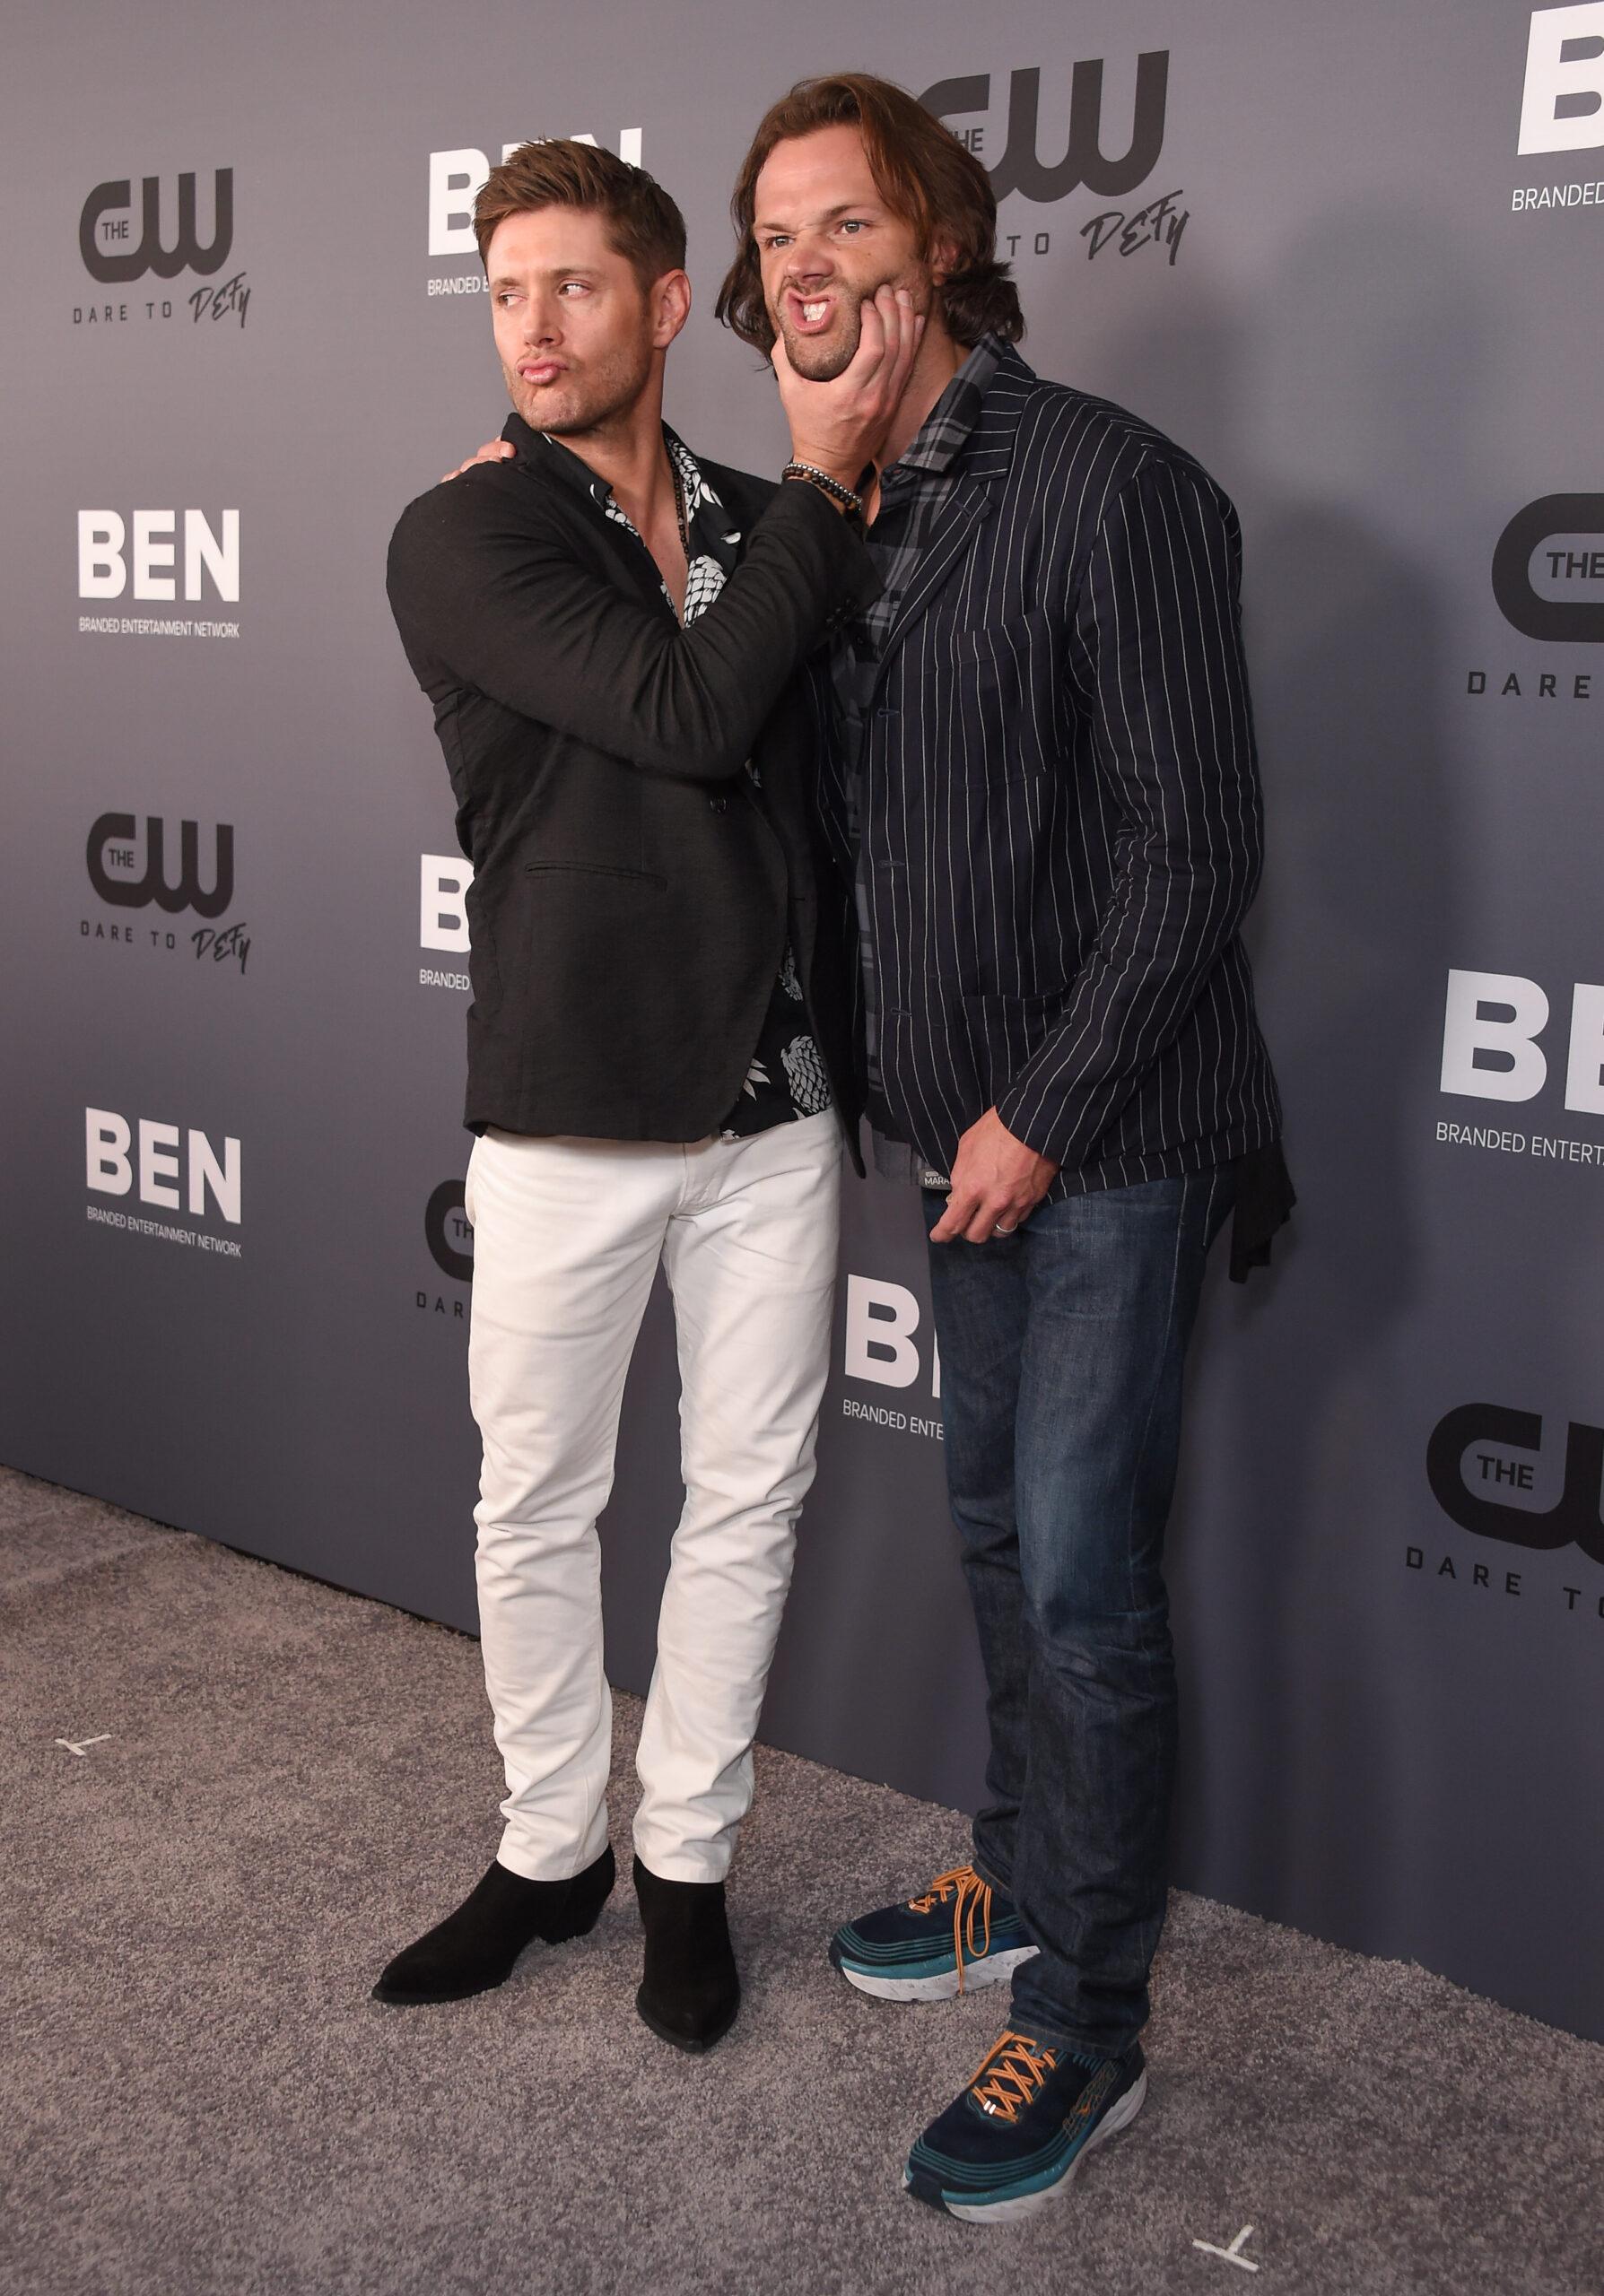 Jared Padalecki and Jensen Ackles at The CW's Summer TCA All Star Party